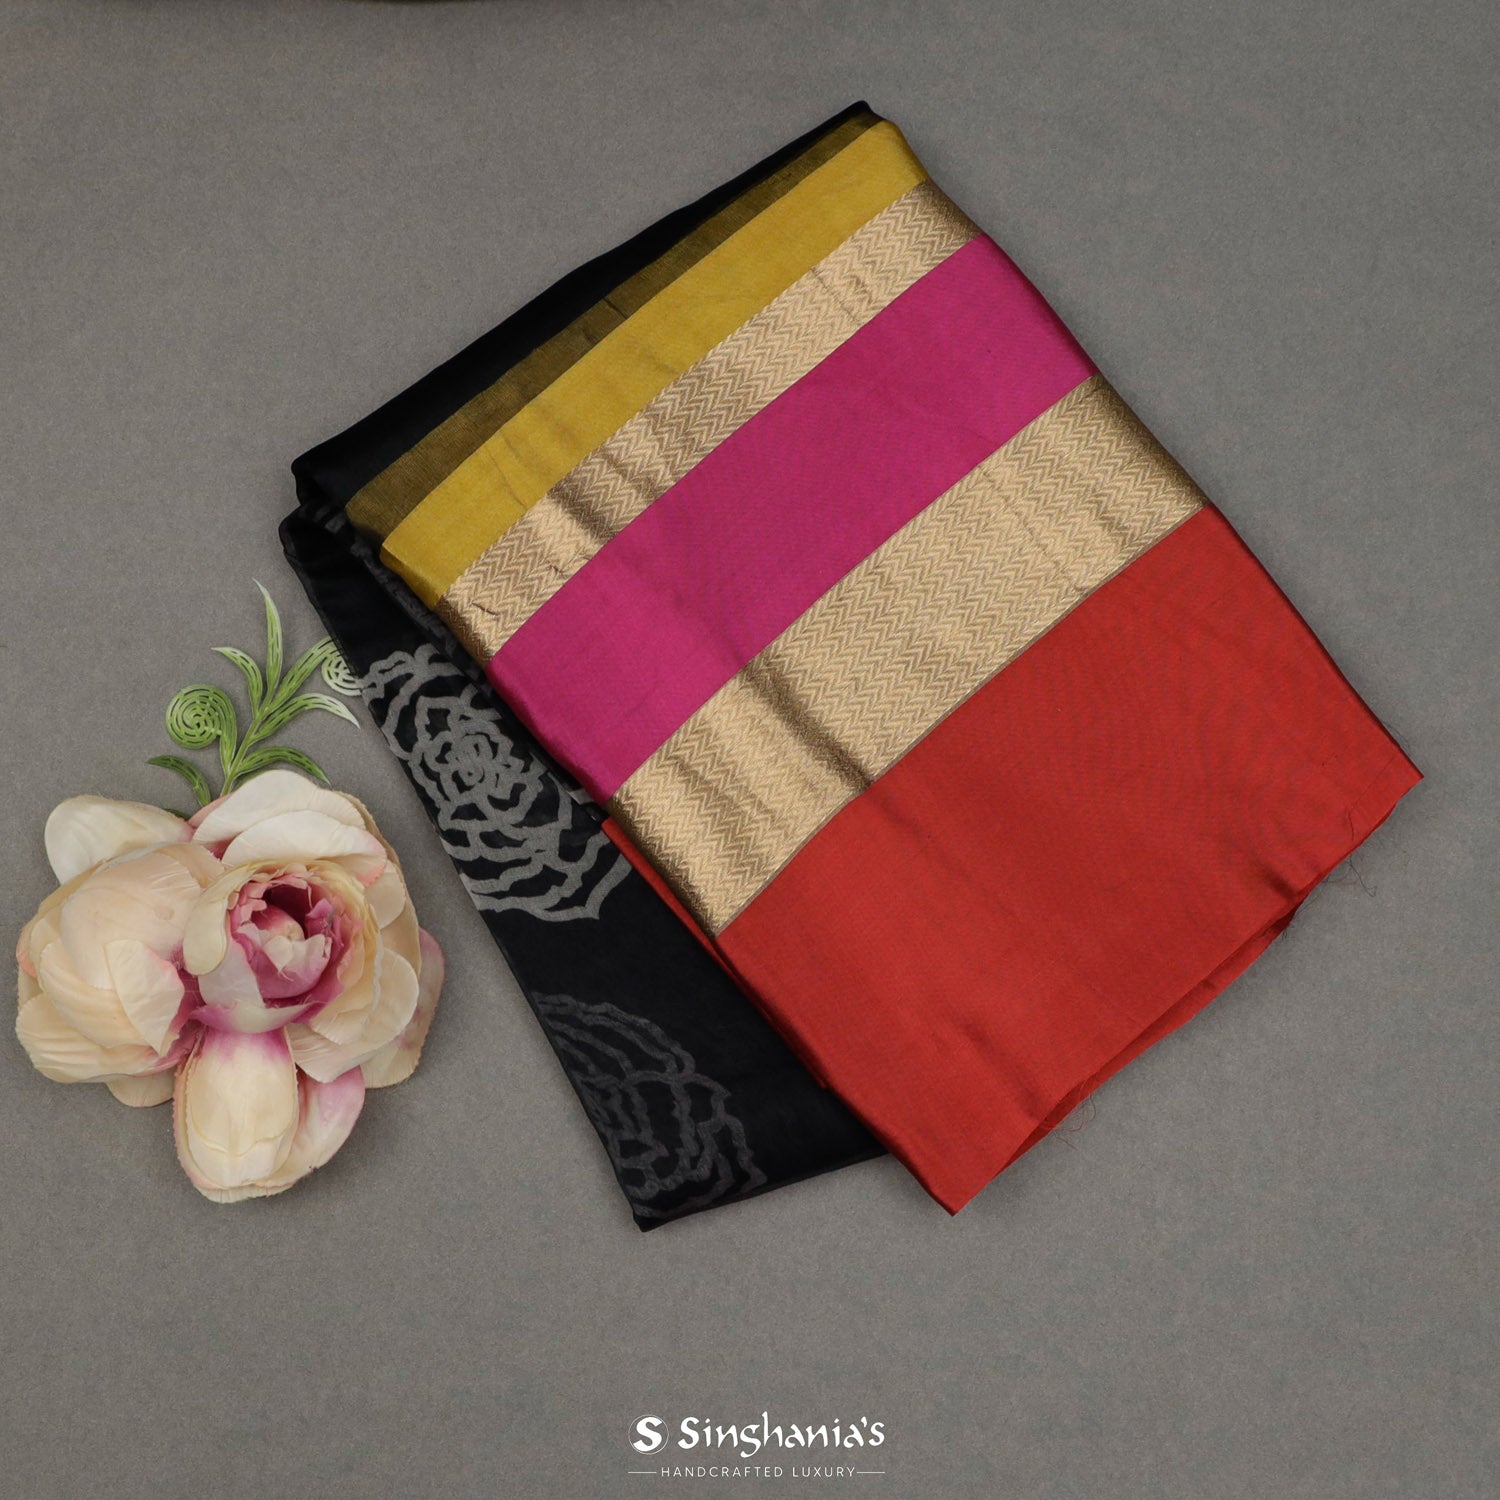 Tech Black Printed Organza Saree With Floral Butti Pattern